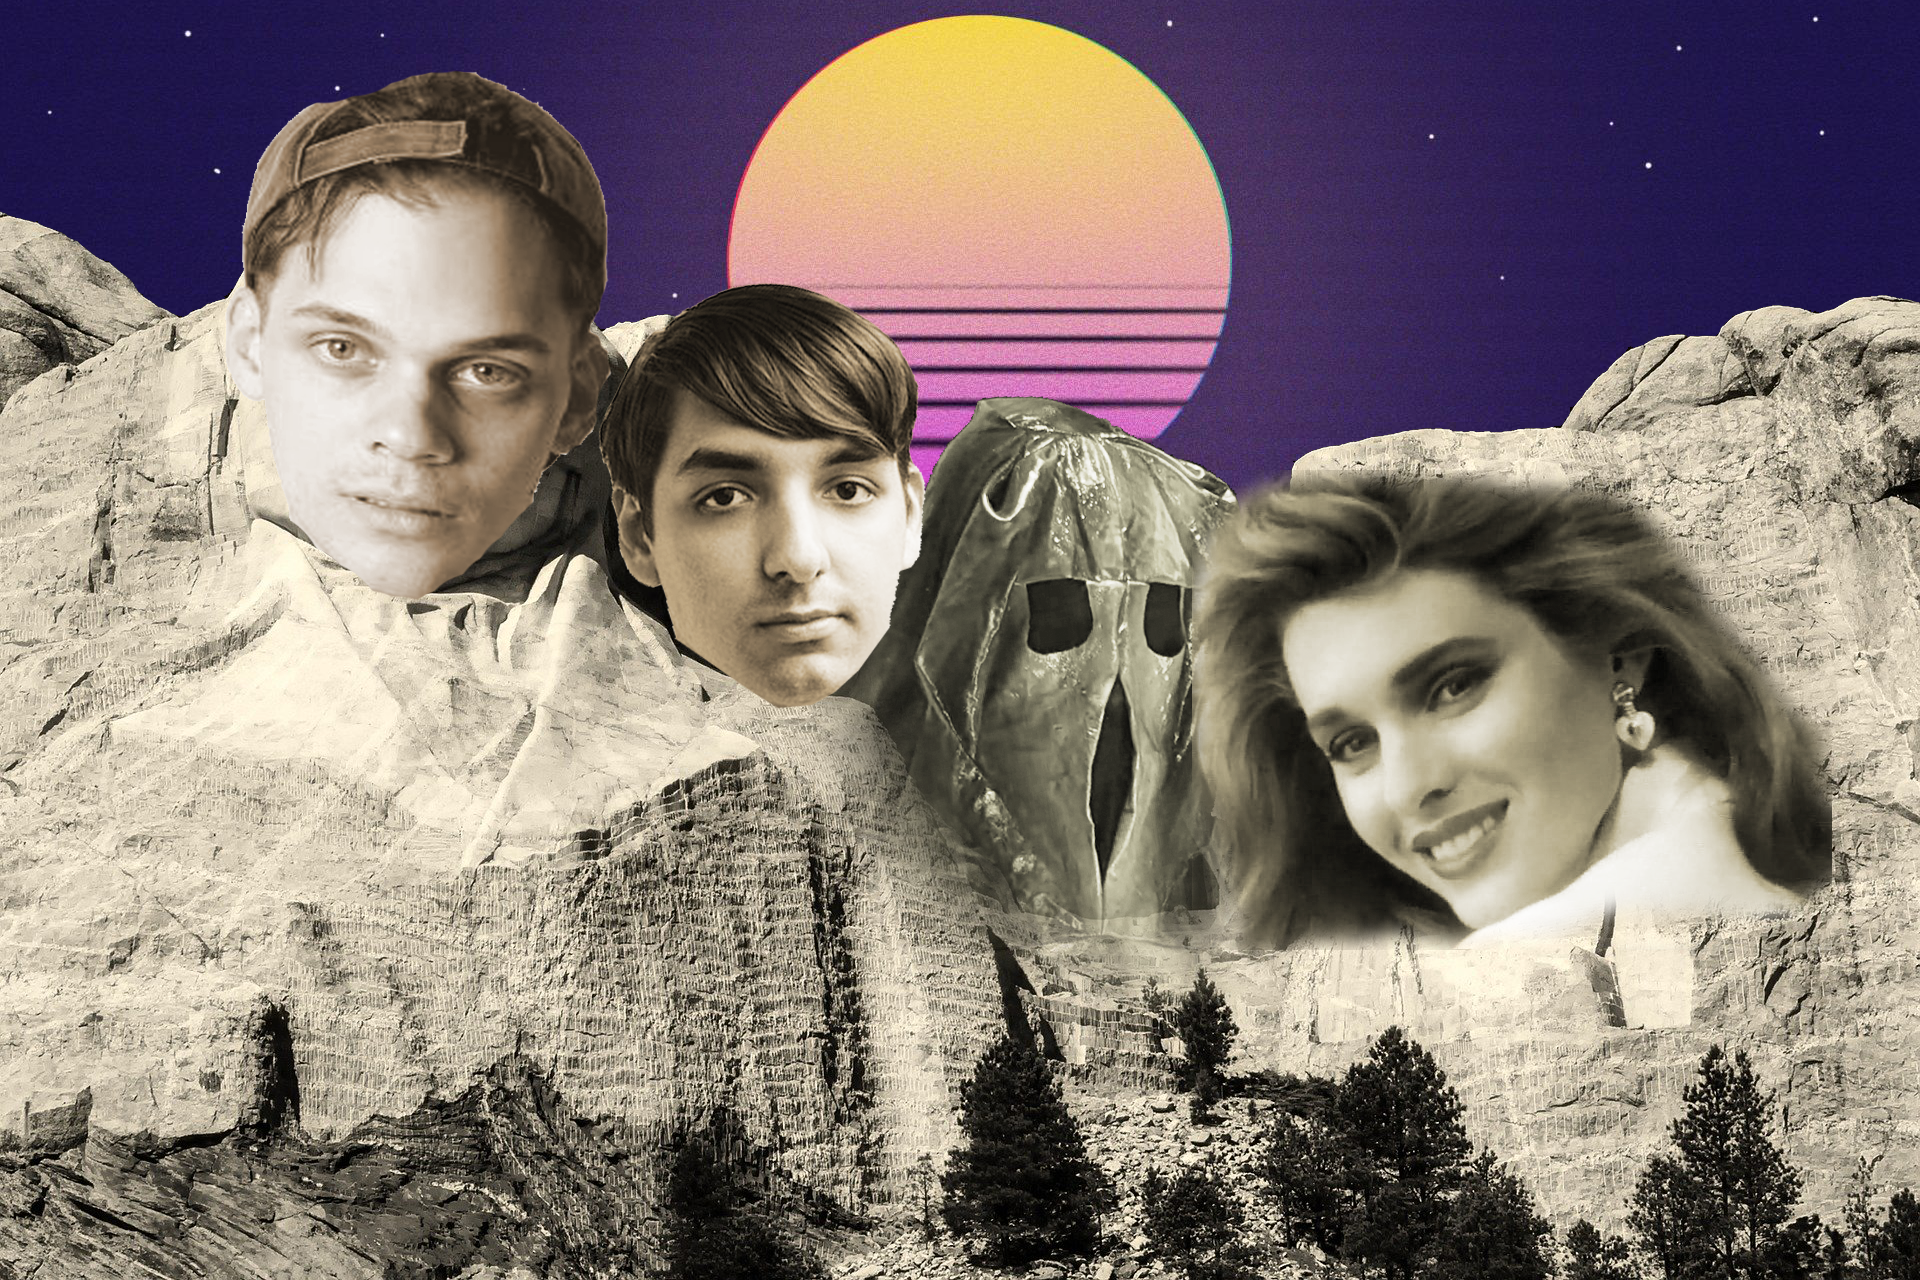 Who would be on the Vaporwave Mount Rushmore?